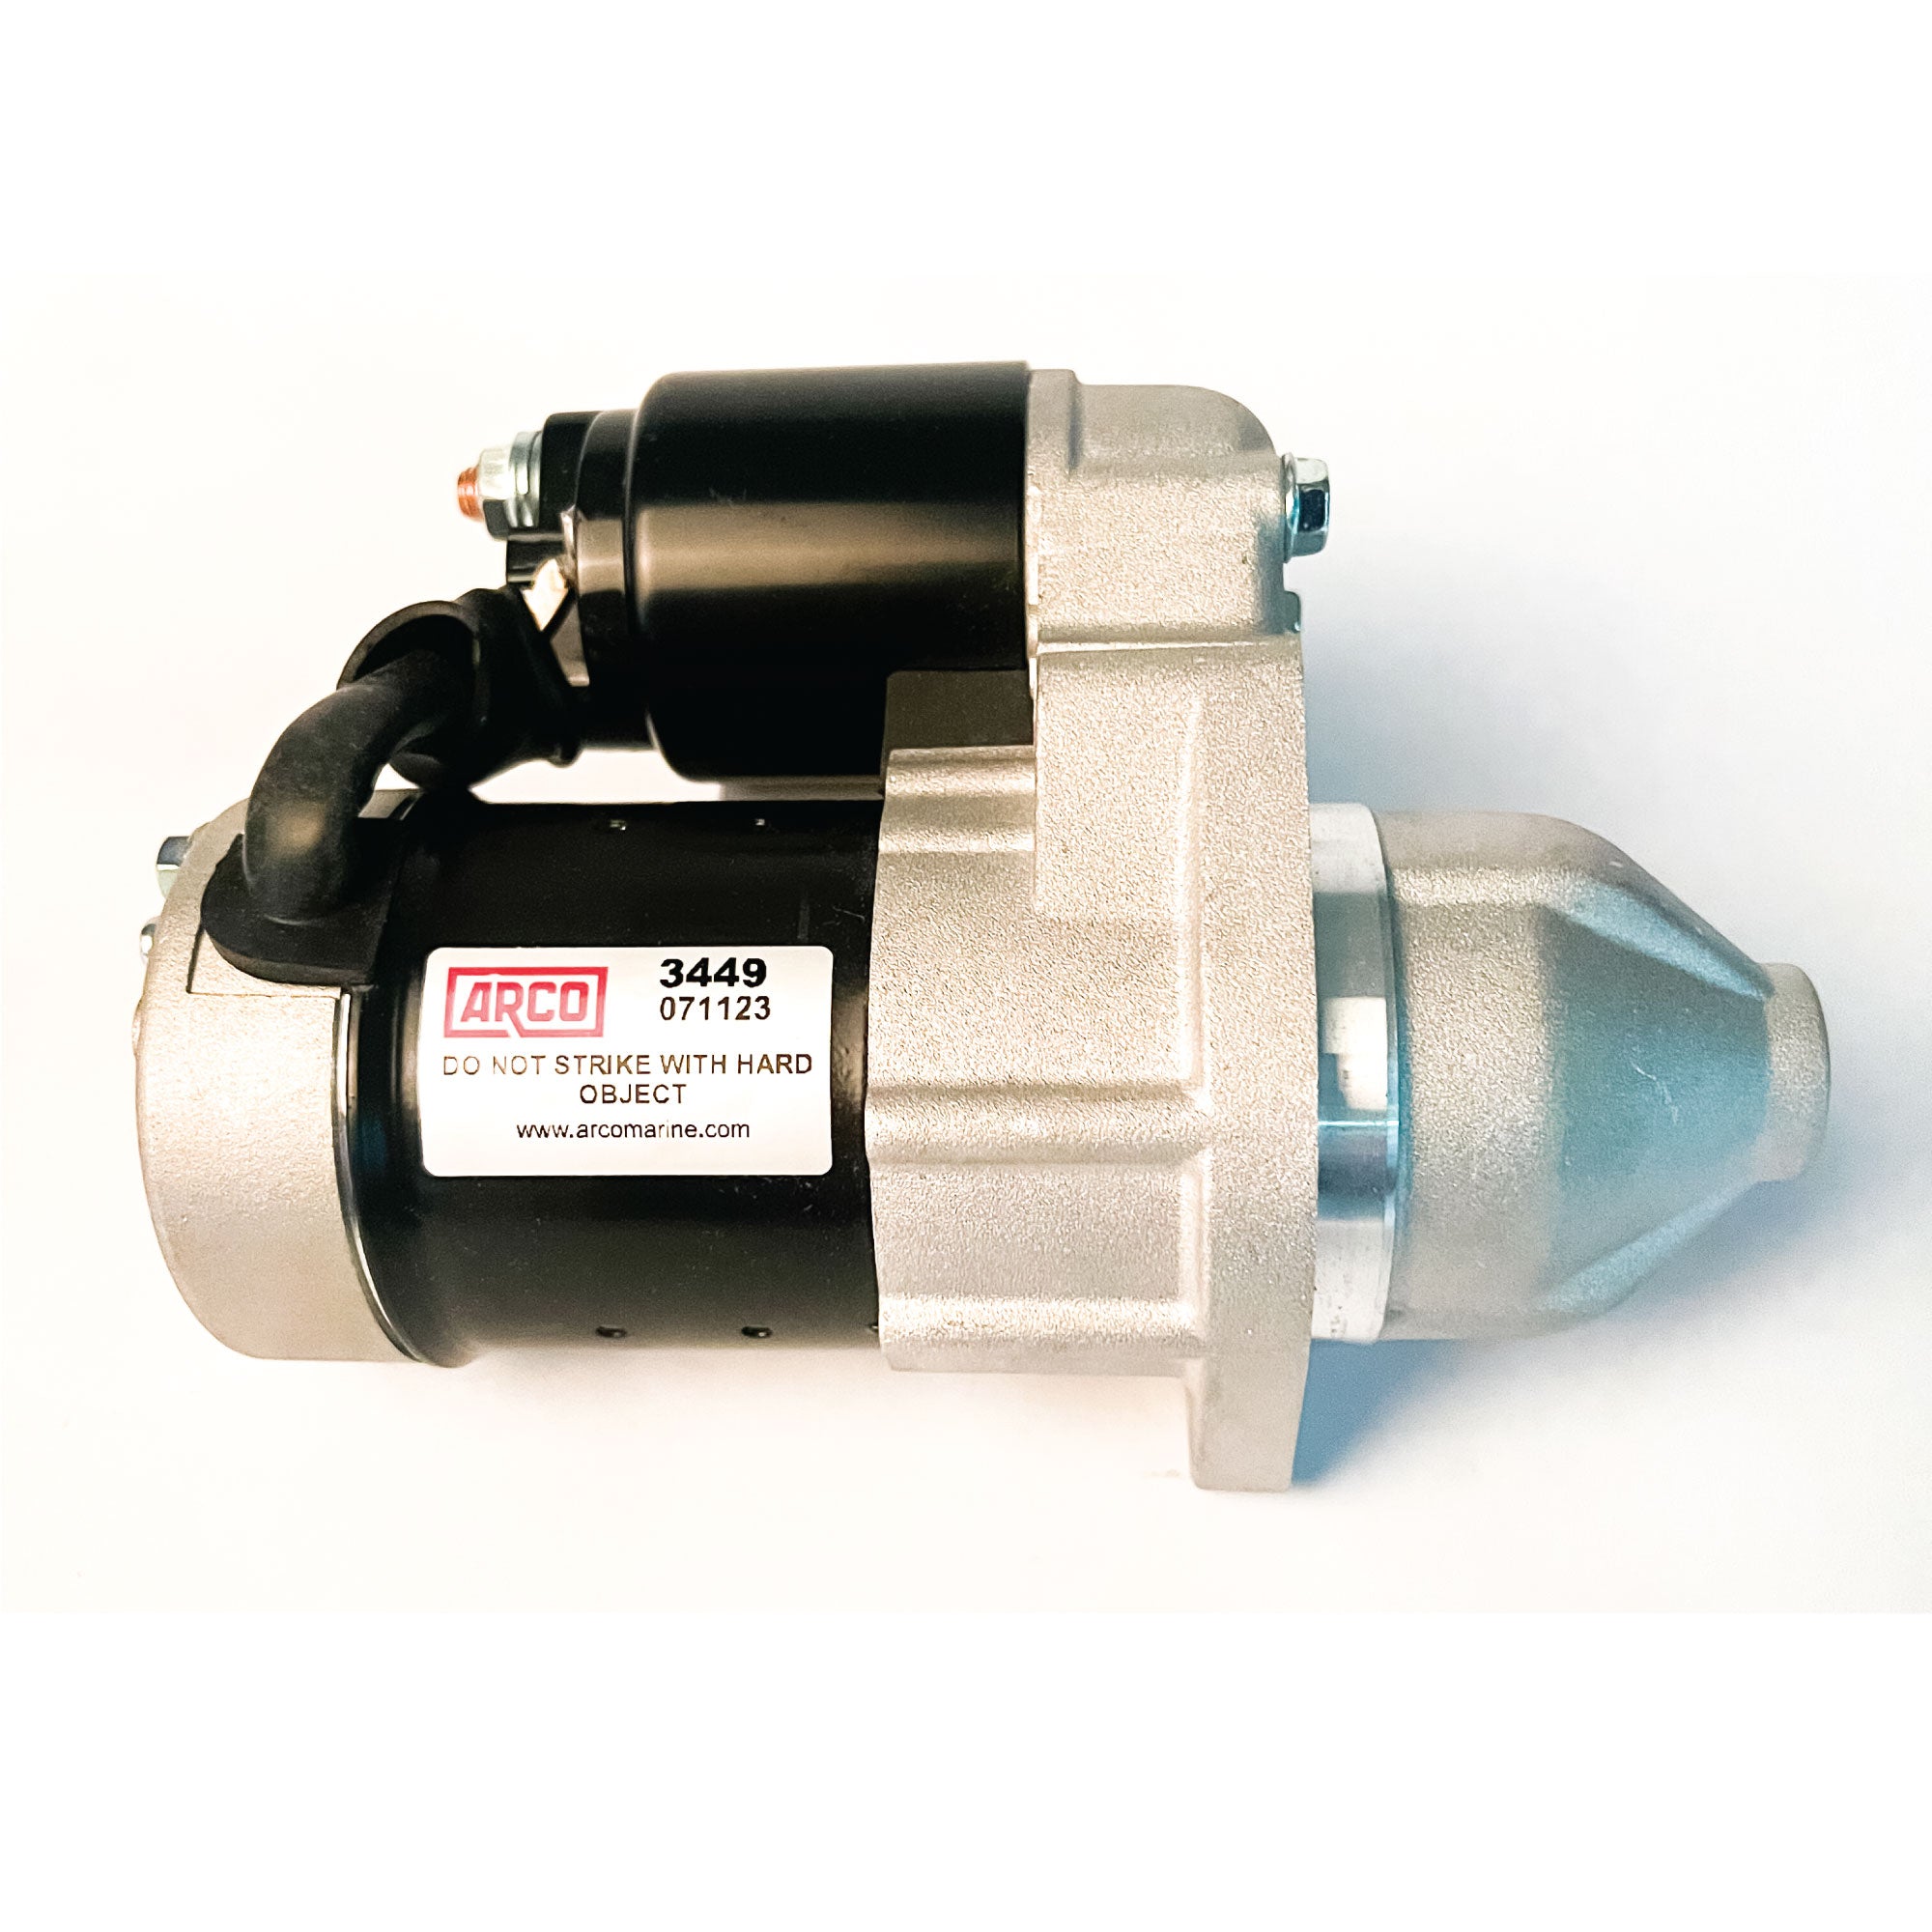 ARCO NEW OEM Premium Replacement Starter for Suzuki and Johnson Evinrude Outboard Engines - 3449